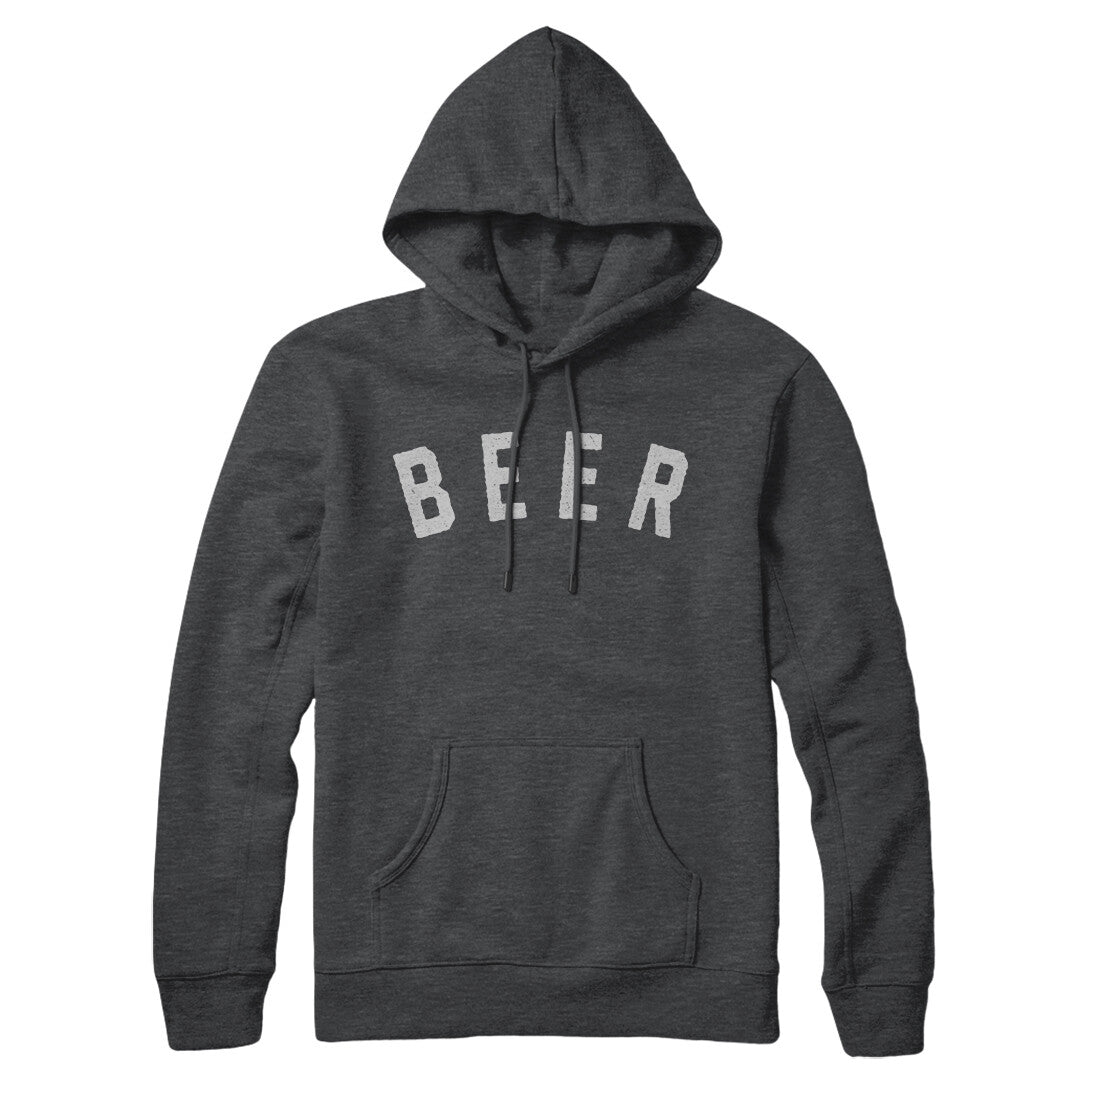 Beer in Charcoal Heather Color